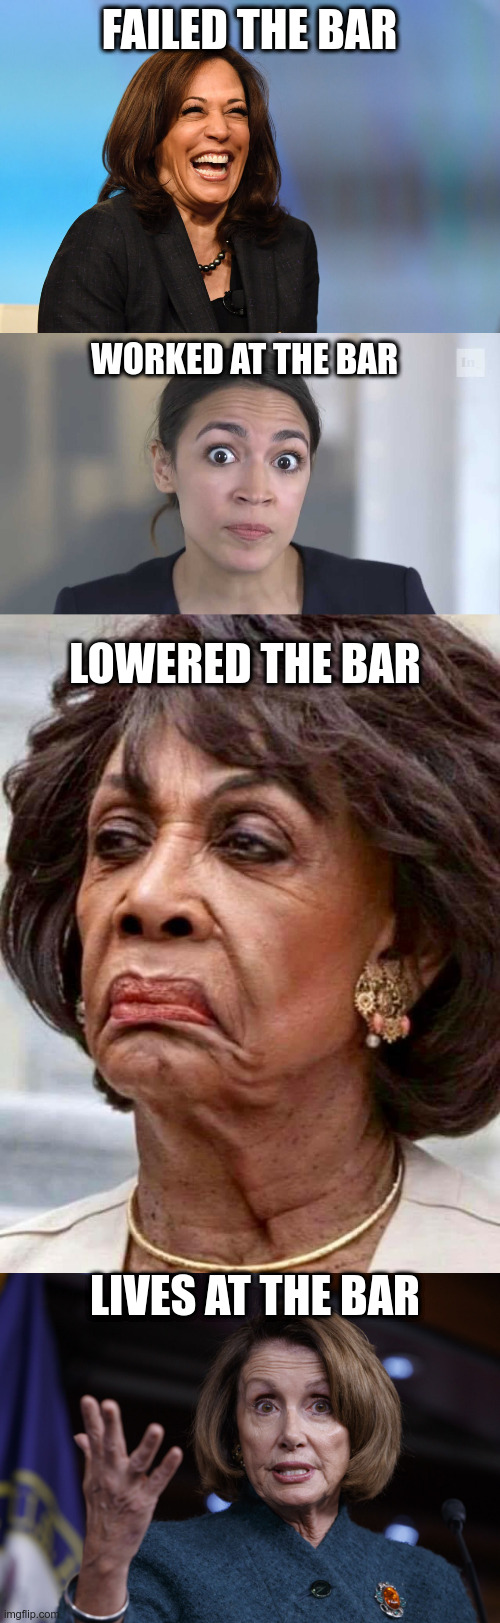 The Bar | FAILED THE BAR; WORKED AT THE BAR; LOWERED THE BAR; LIVES AT THE BAR | image tagged in kamala harris laughing,aoc stumped,maxine waters,good old nancy pelosi,political meme | made w/ Imgflip meme maker